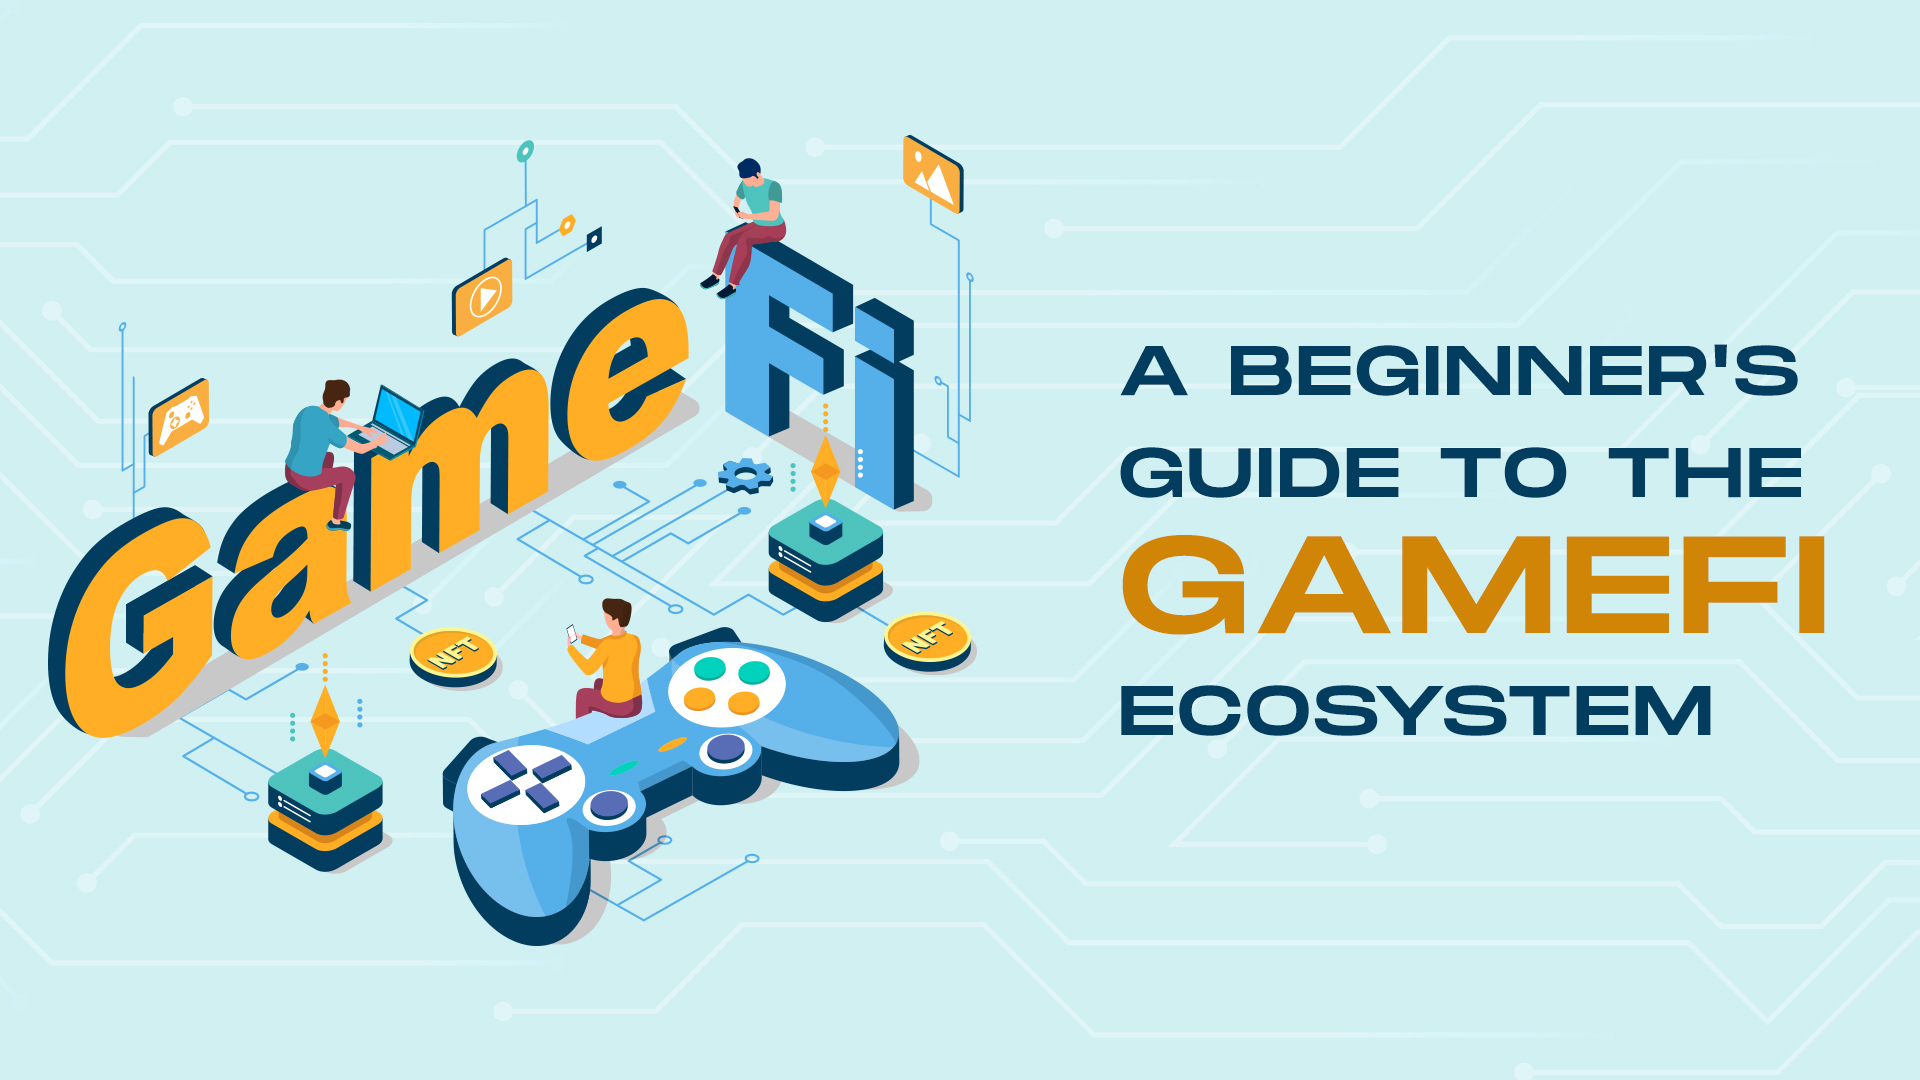 A Beginner’s Guide To The GameFi Ecosystem